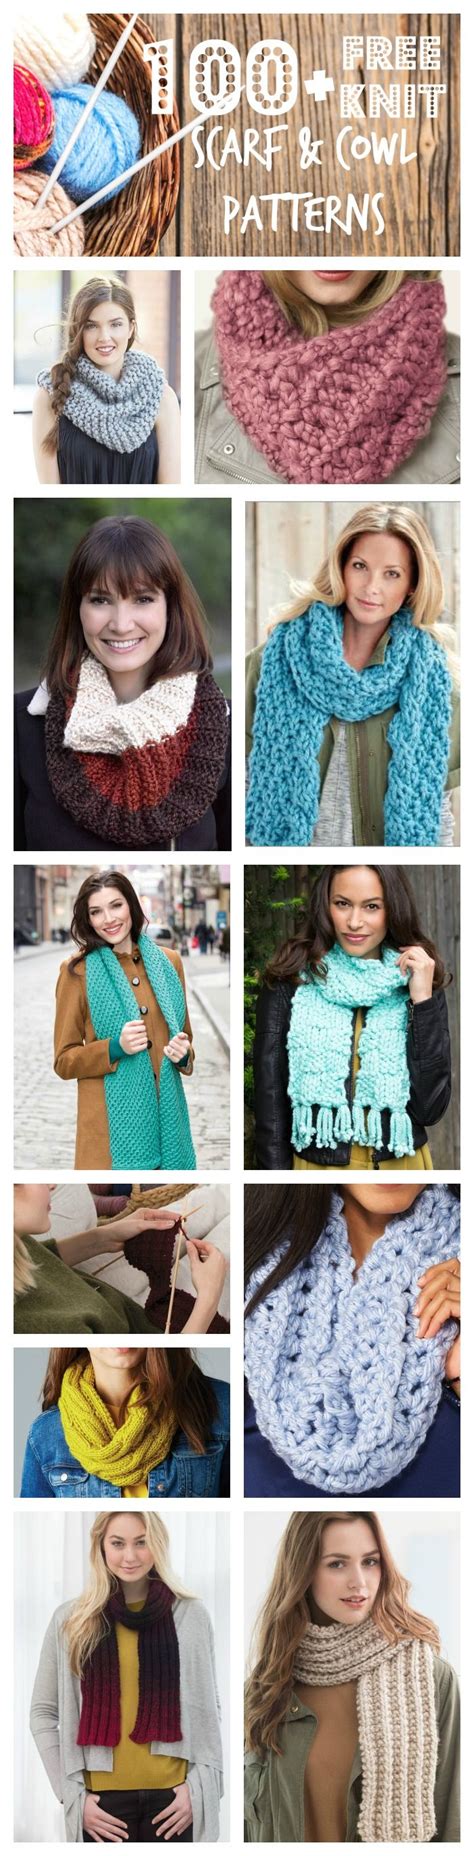 Never Pay For A Knit Scarf Or Cowl Pattern Again Find